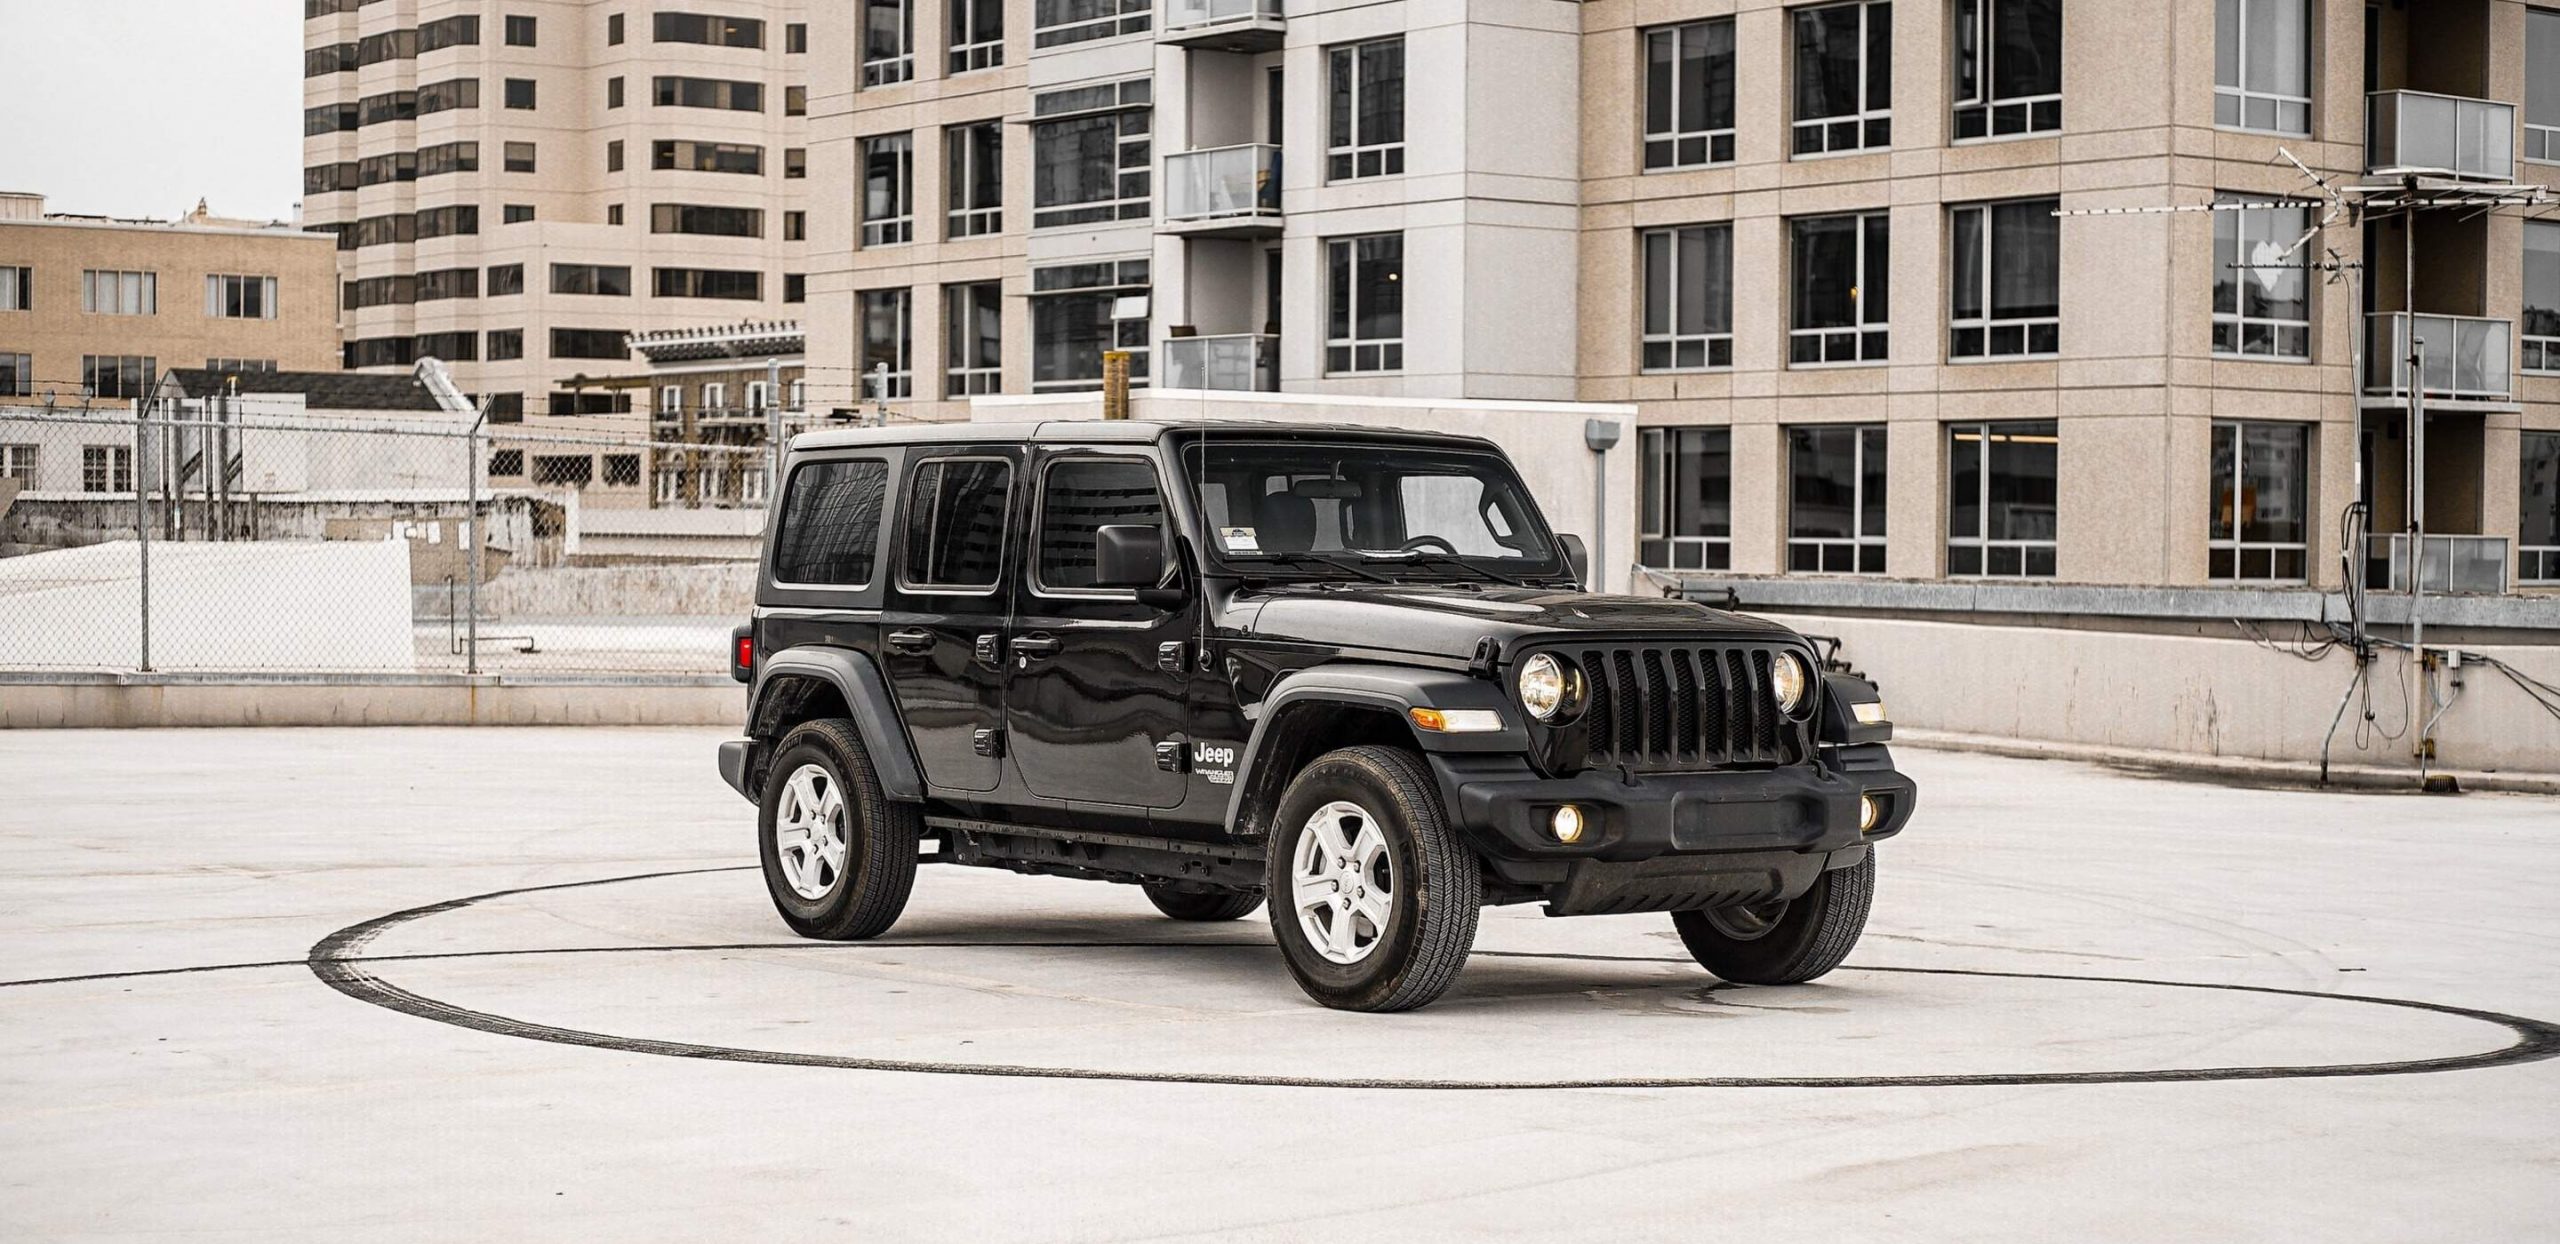 2019-black-jeep-wrangler-unlimited-featured-image